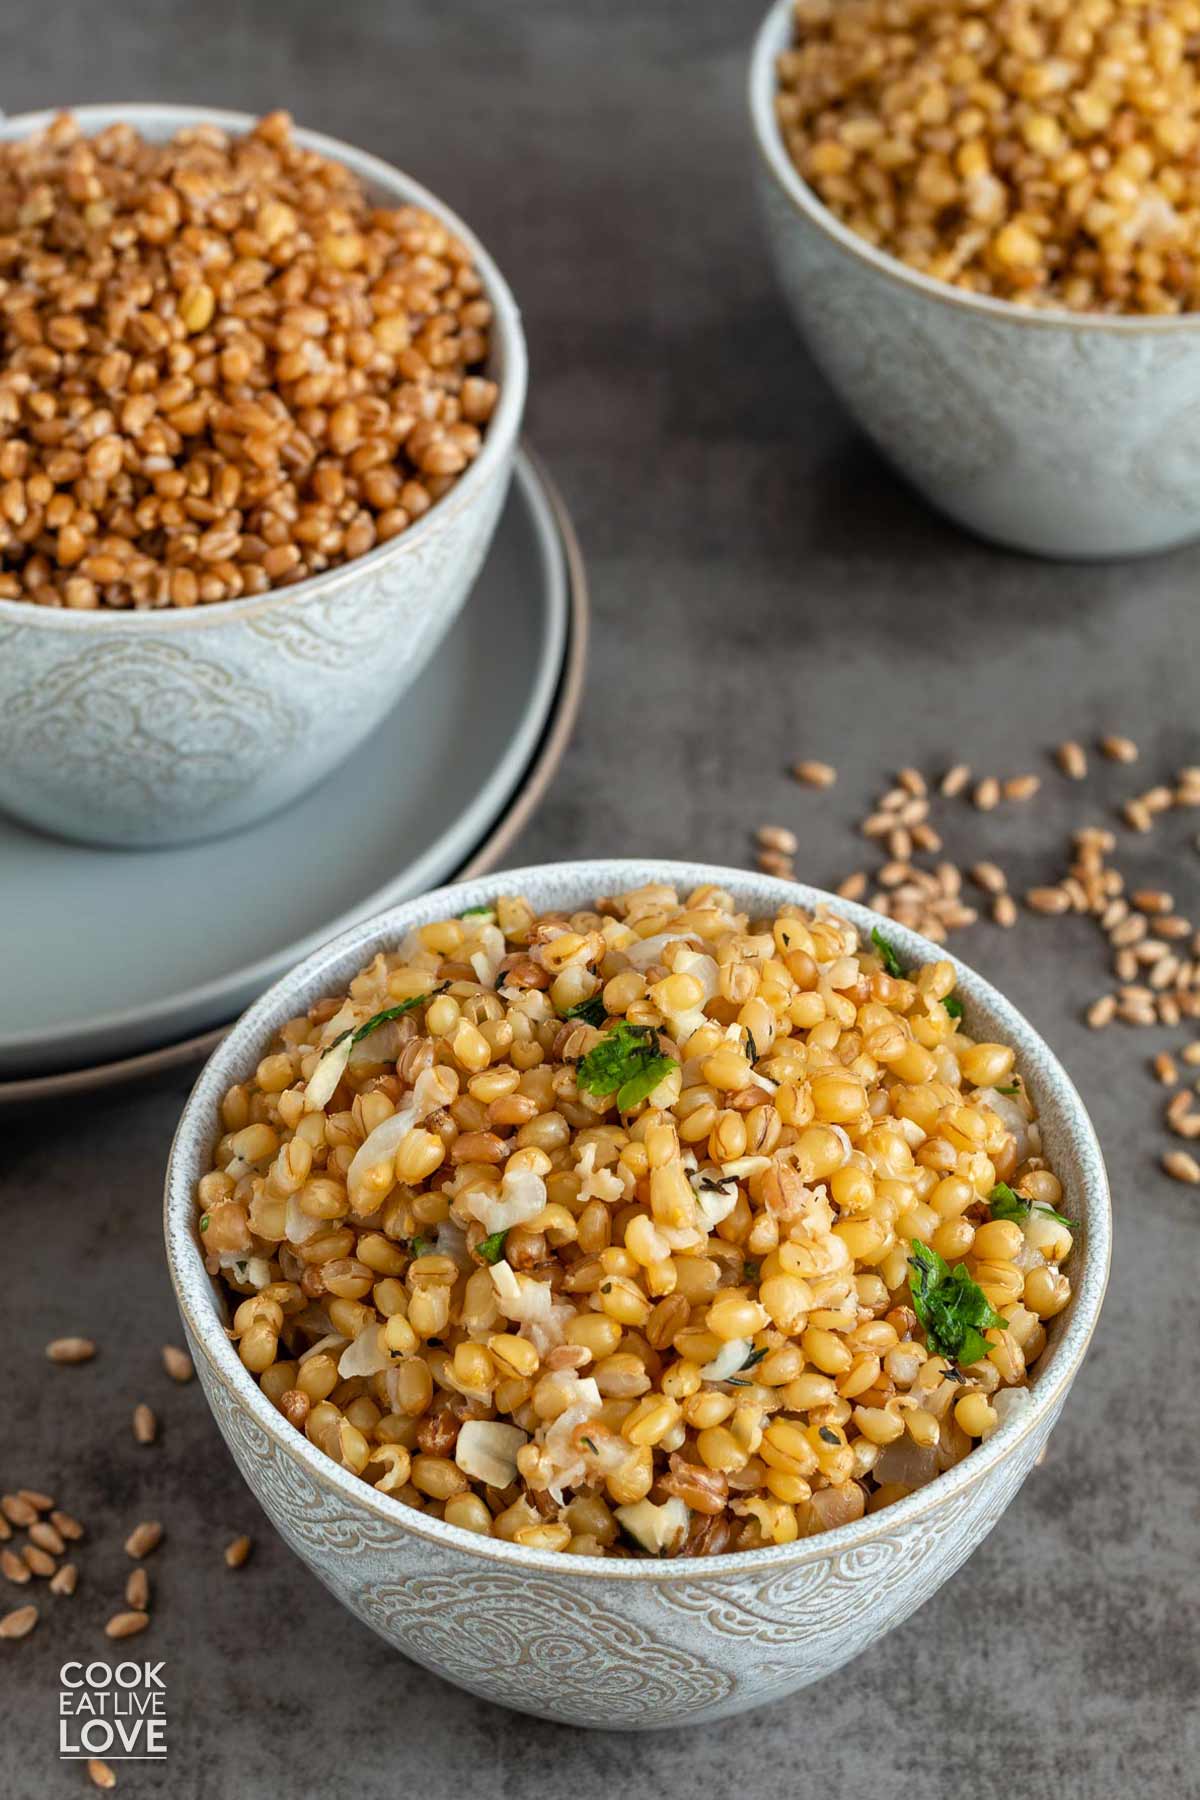 Three different kinds of cooked wheat berries in bowls on the table.